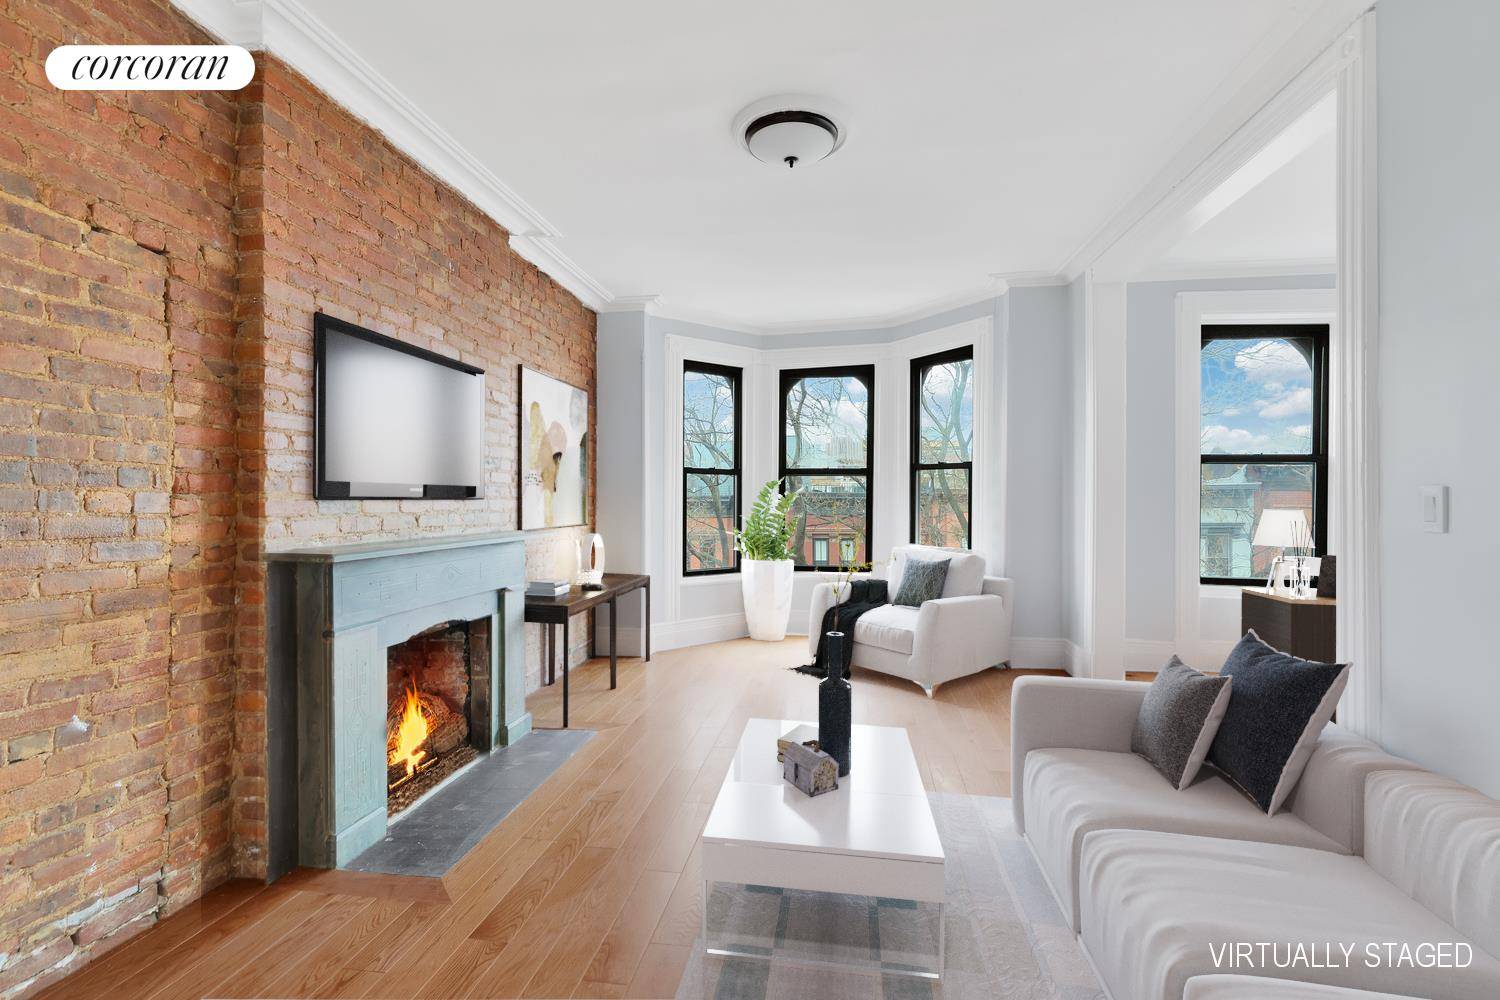 Welcome to 590 10th Street ; an impeccably townhouse that was recently renovated featuring full floor 2 bedroom 2 bathroom residences on a quiet tree lined street between highly coveted ...